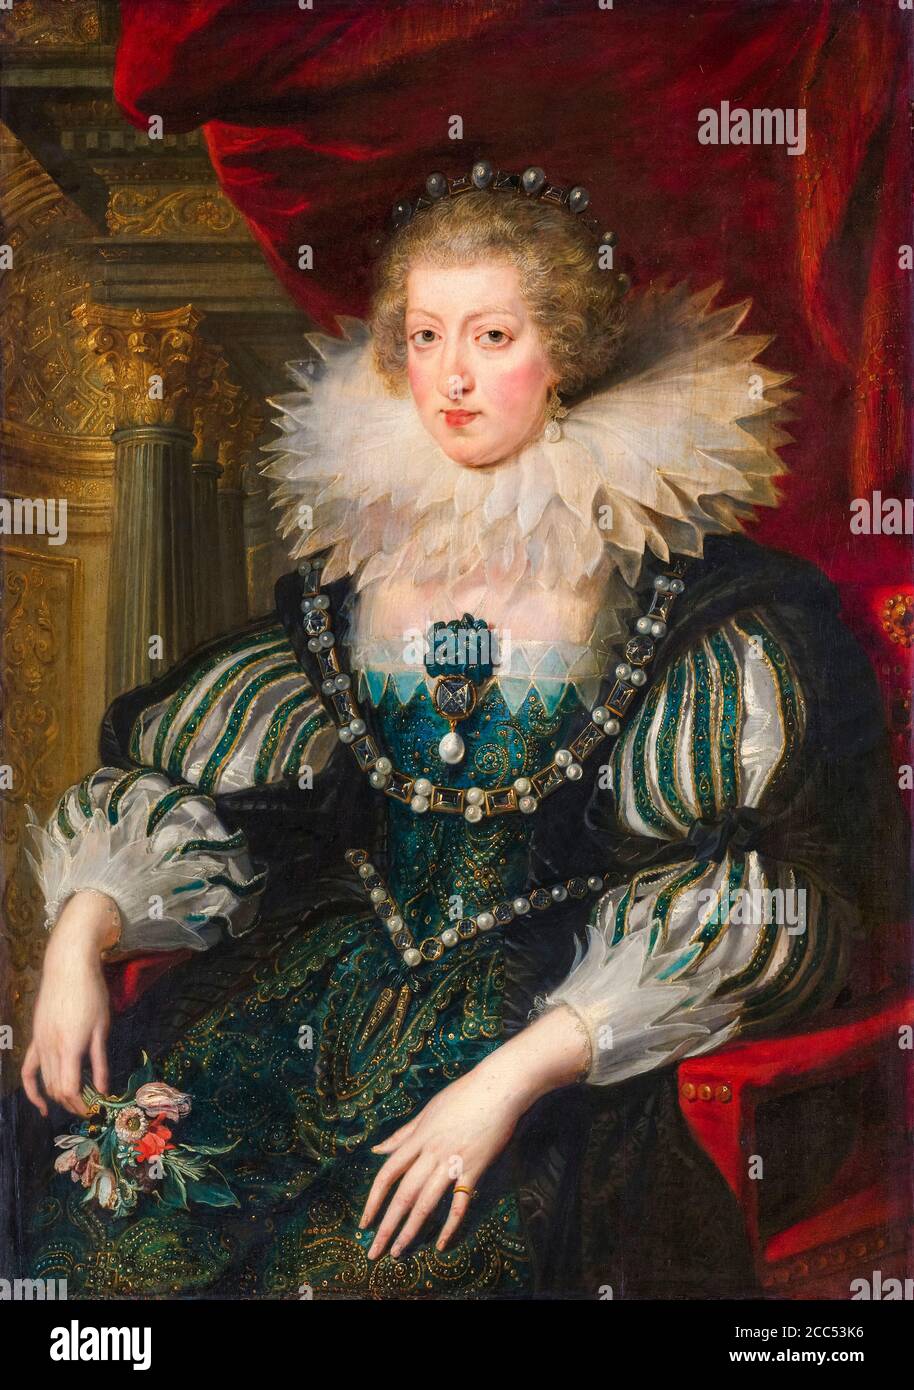 Anne of Austria (1601-1666), Queen of France, wife of Louis XIII, King of France, portrait painting by Workshop of Peter Paul Rubens, 1625-1626 Stock Photo